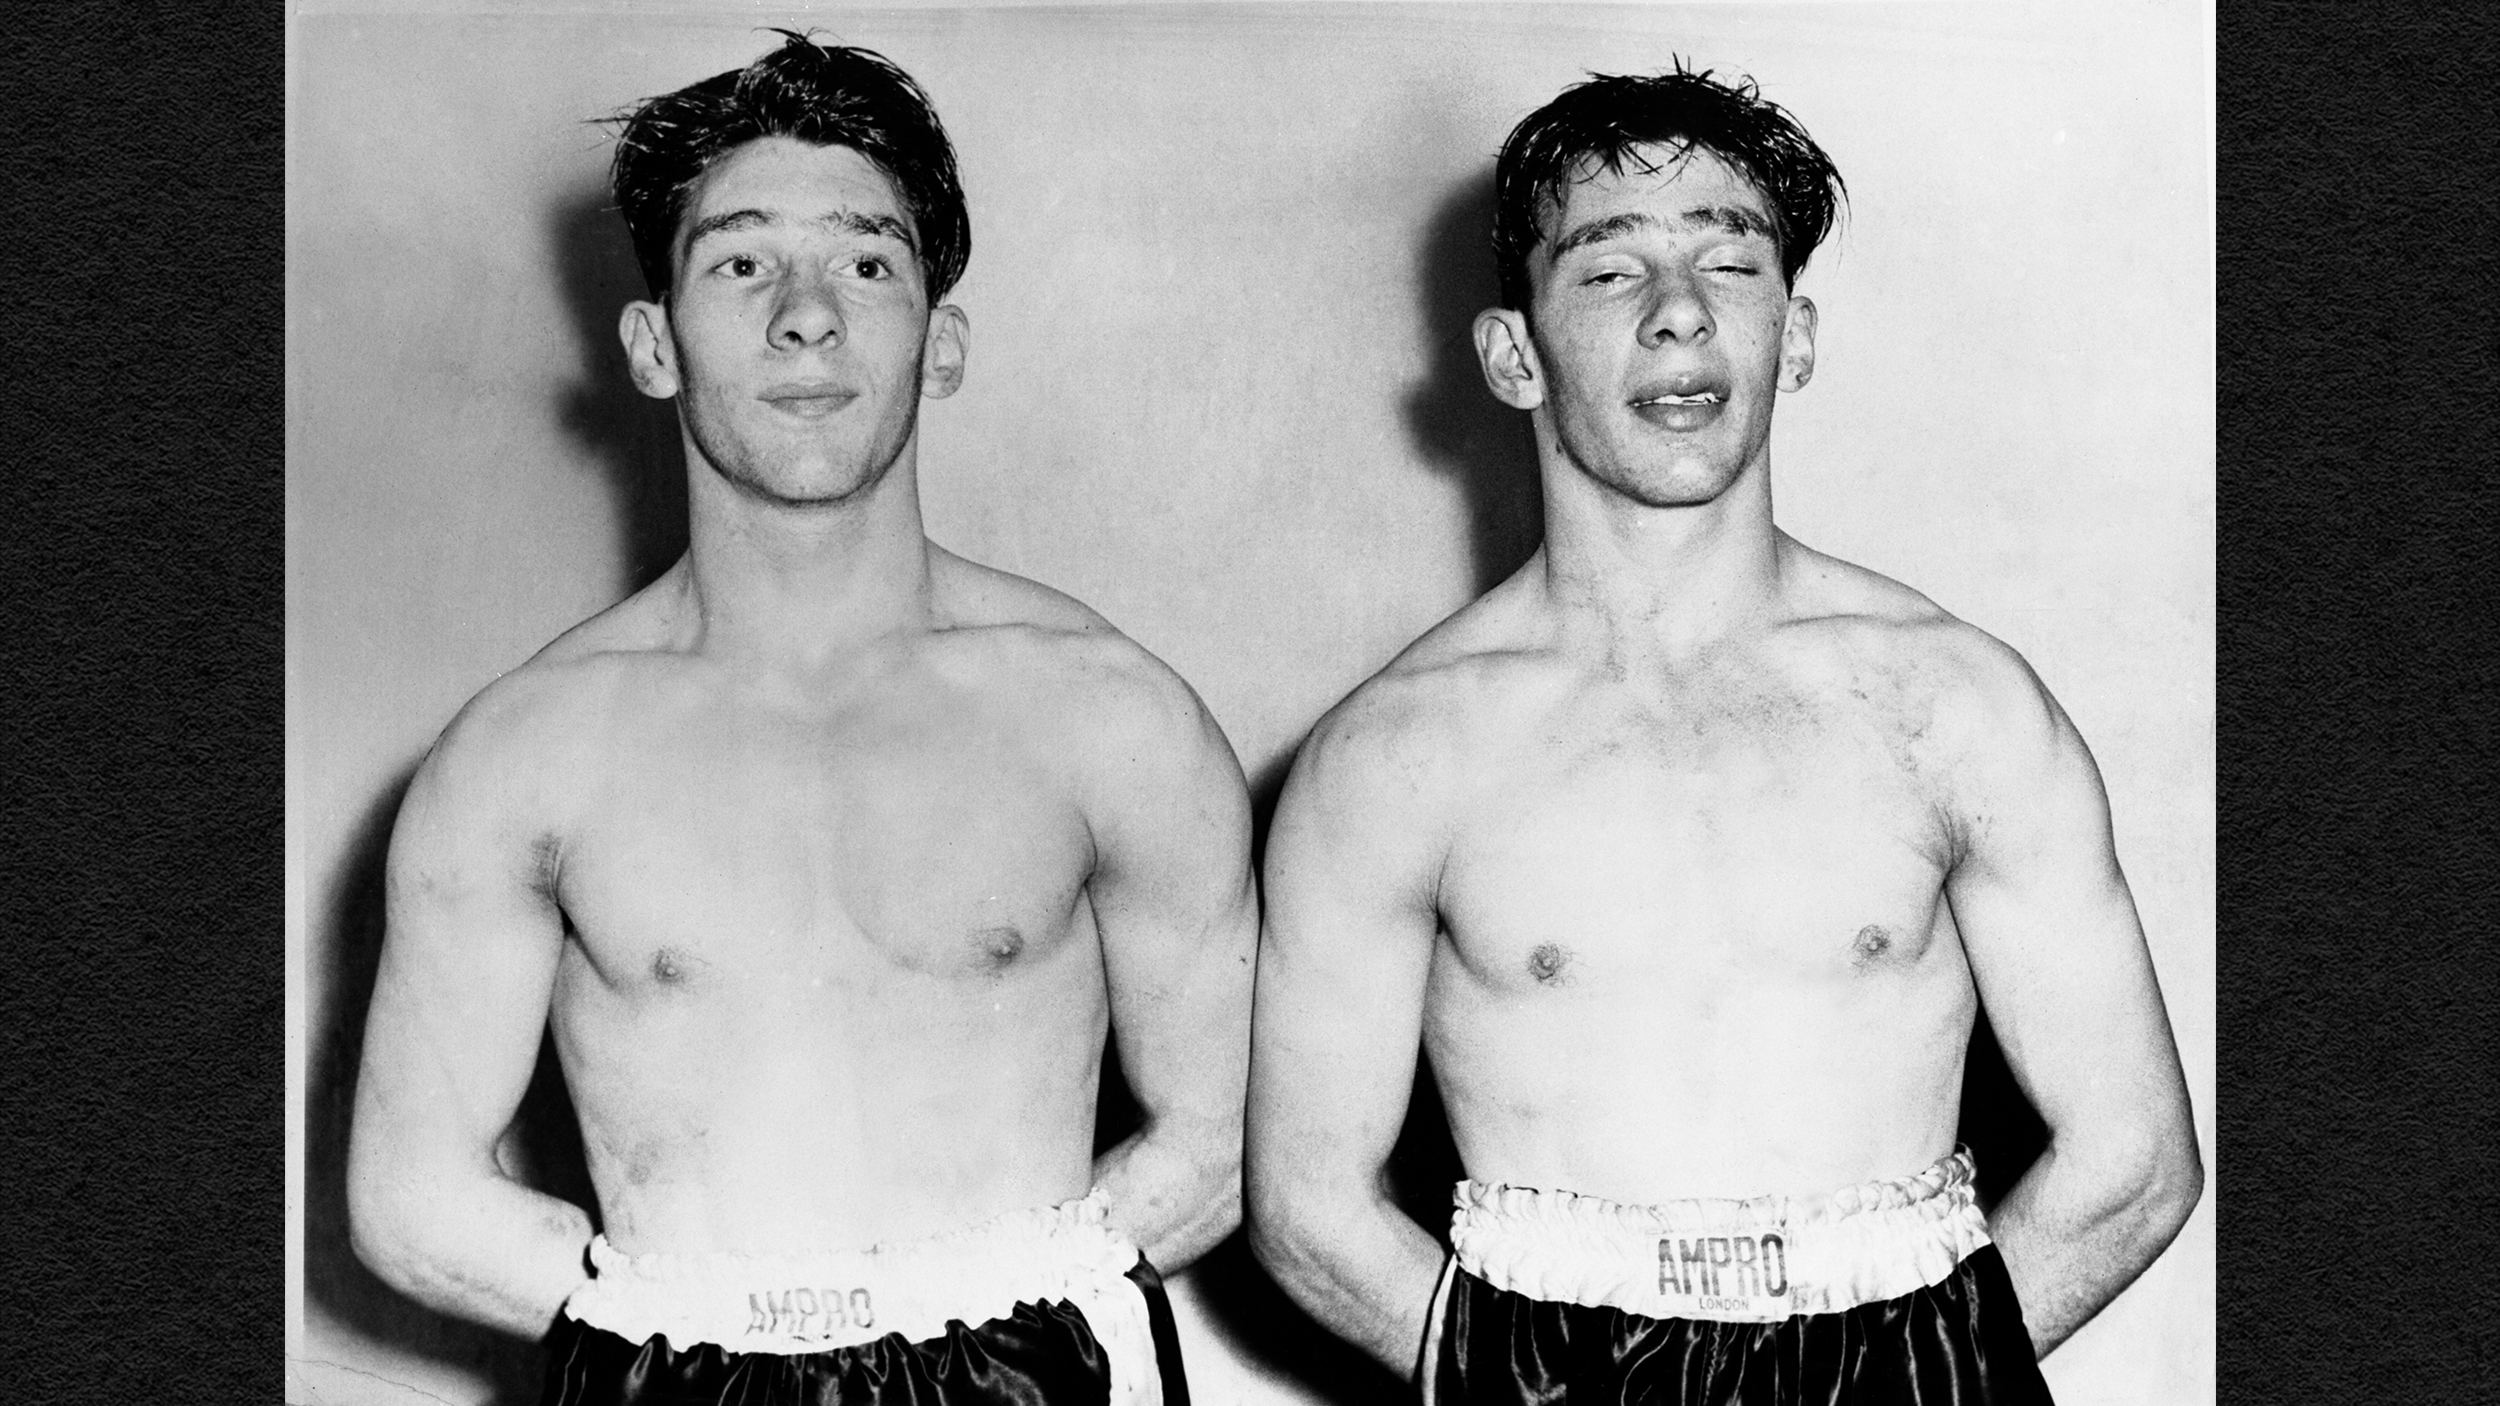 Two identical twin men in boxing gear standing next to each other.